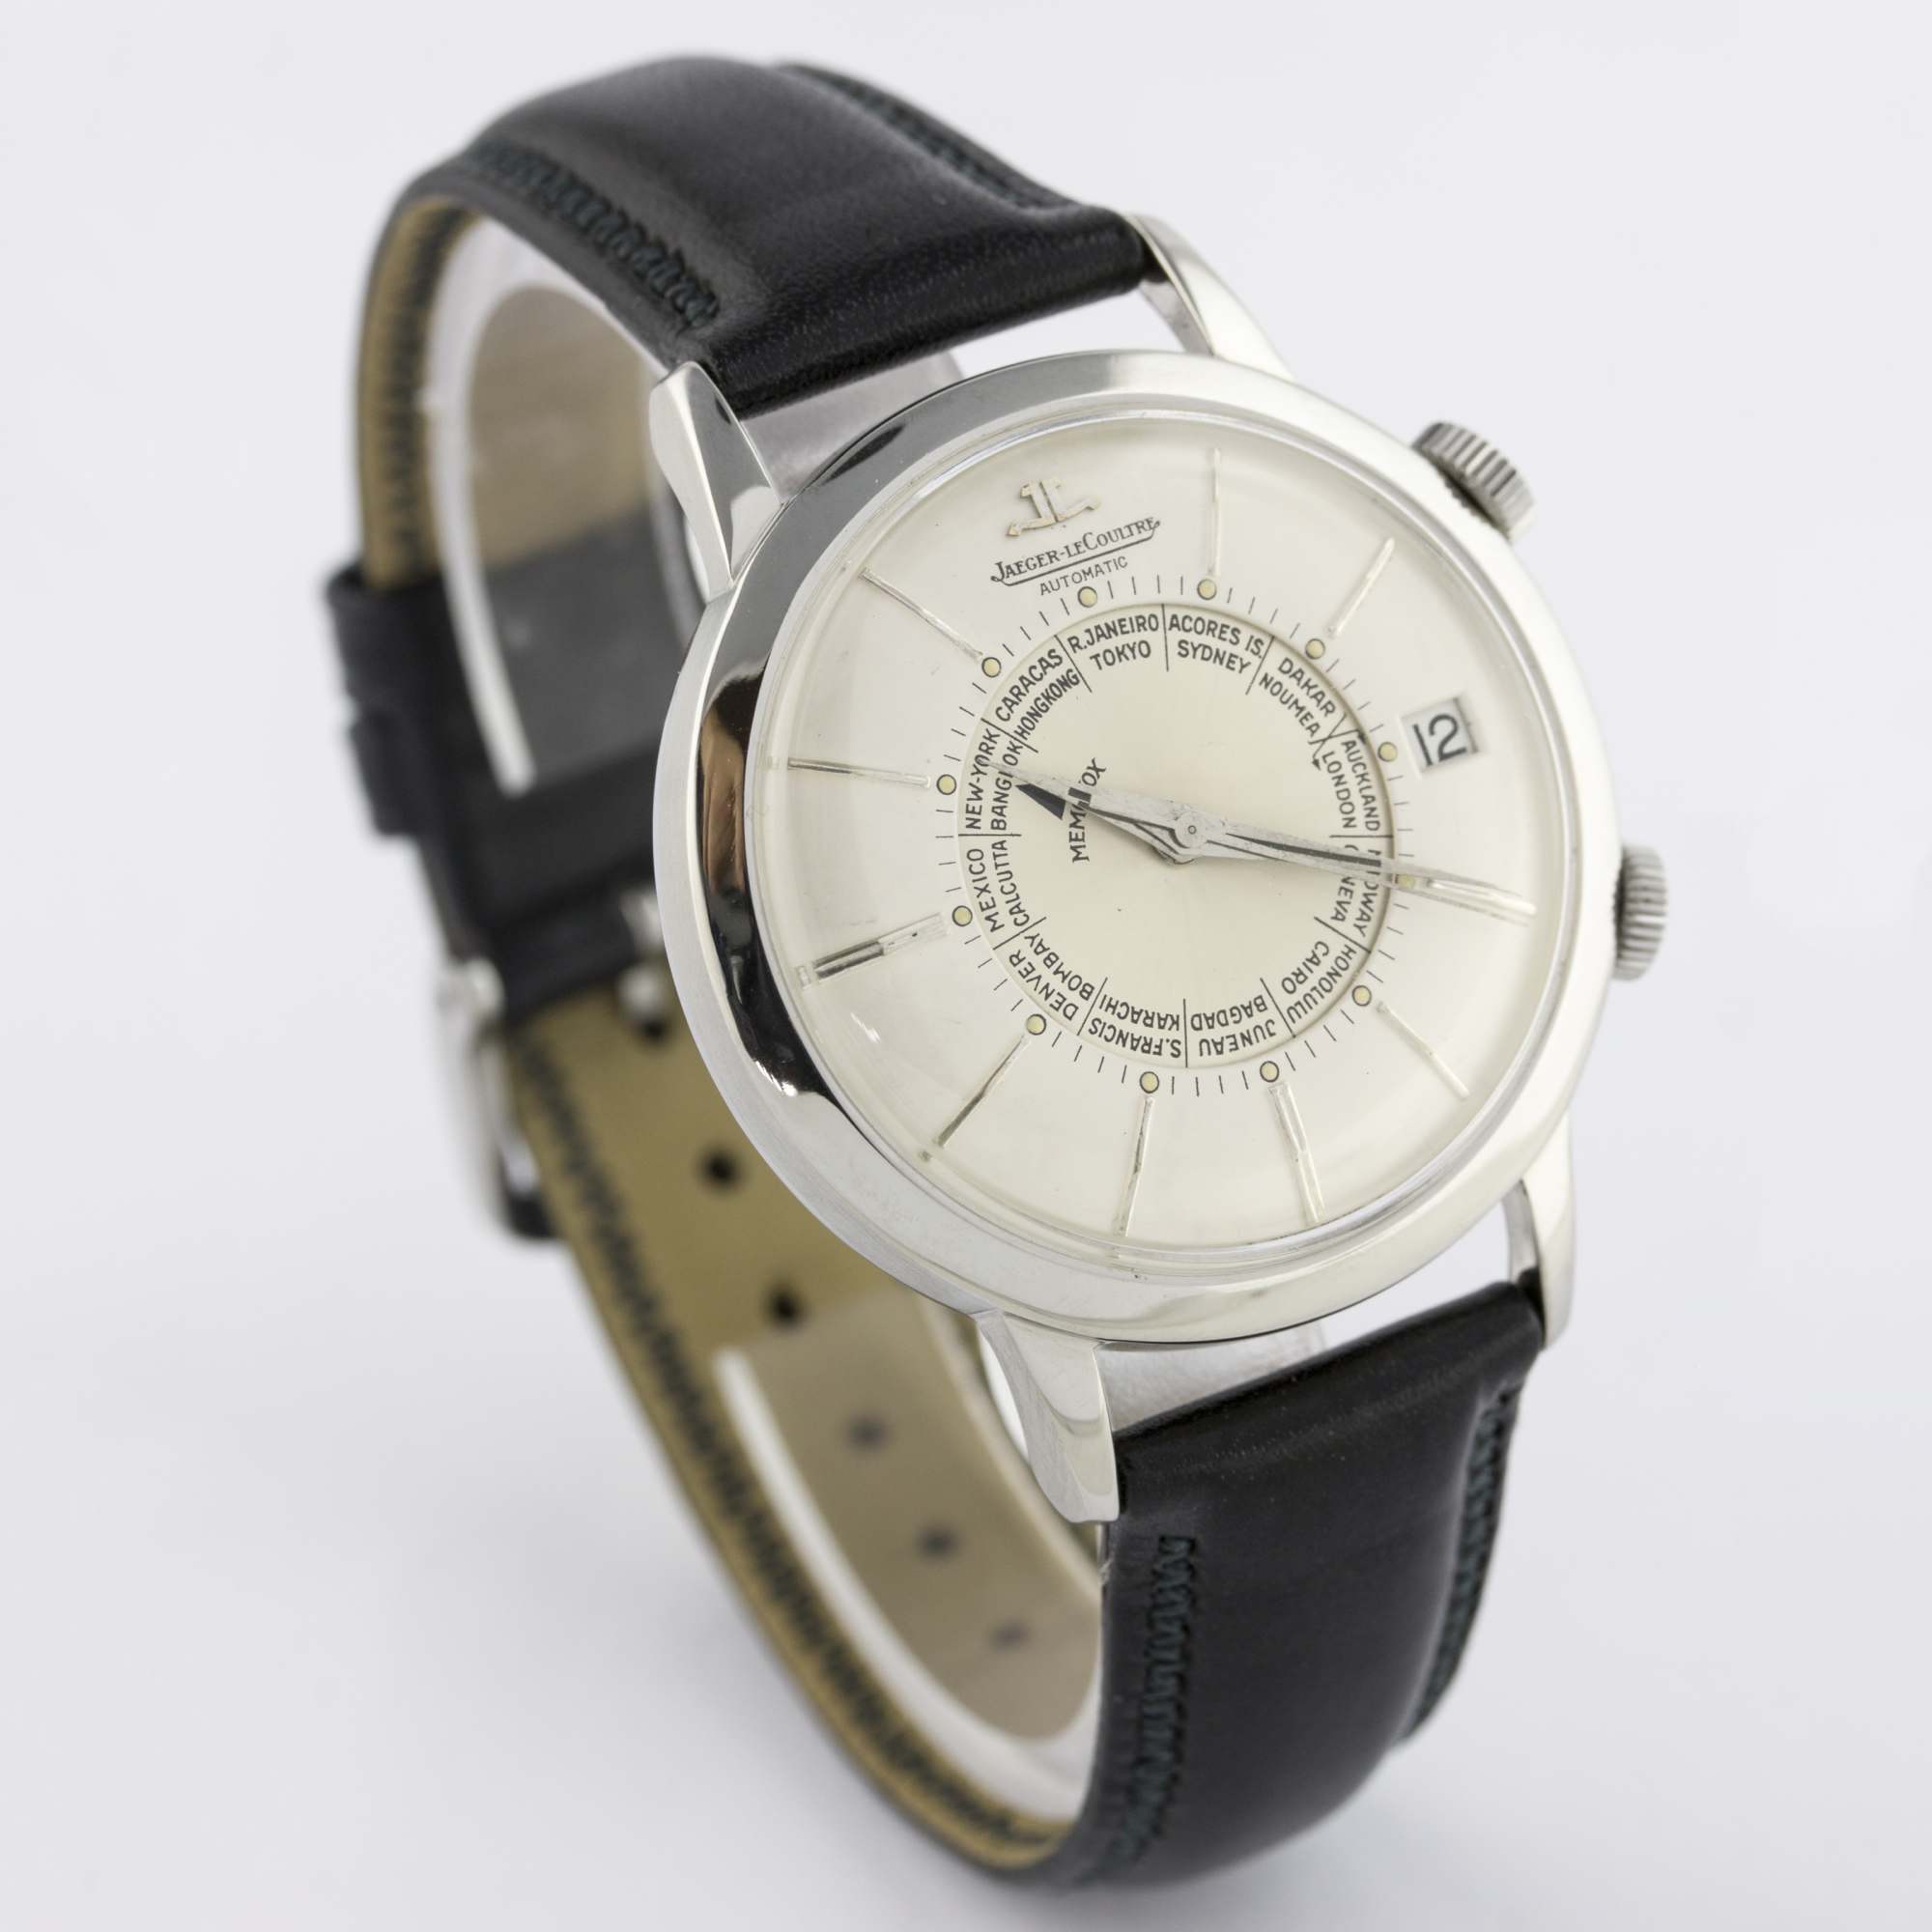 A GENTLEMAN'S STAINLESS STEEL JAEGER LECOULTRE AUTOMATIC MEMOVOX ALARM WRIST WATCH CIRCA 1960s D: - Image 4 of 7